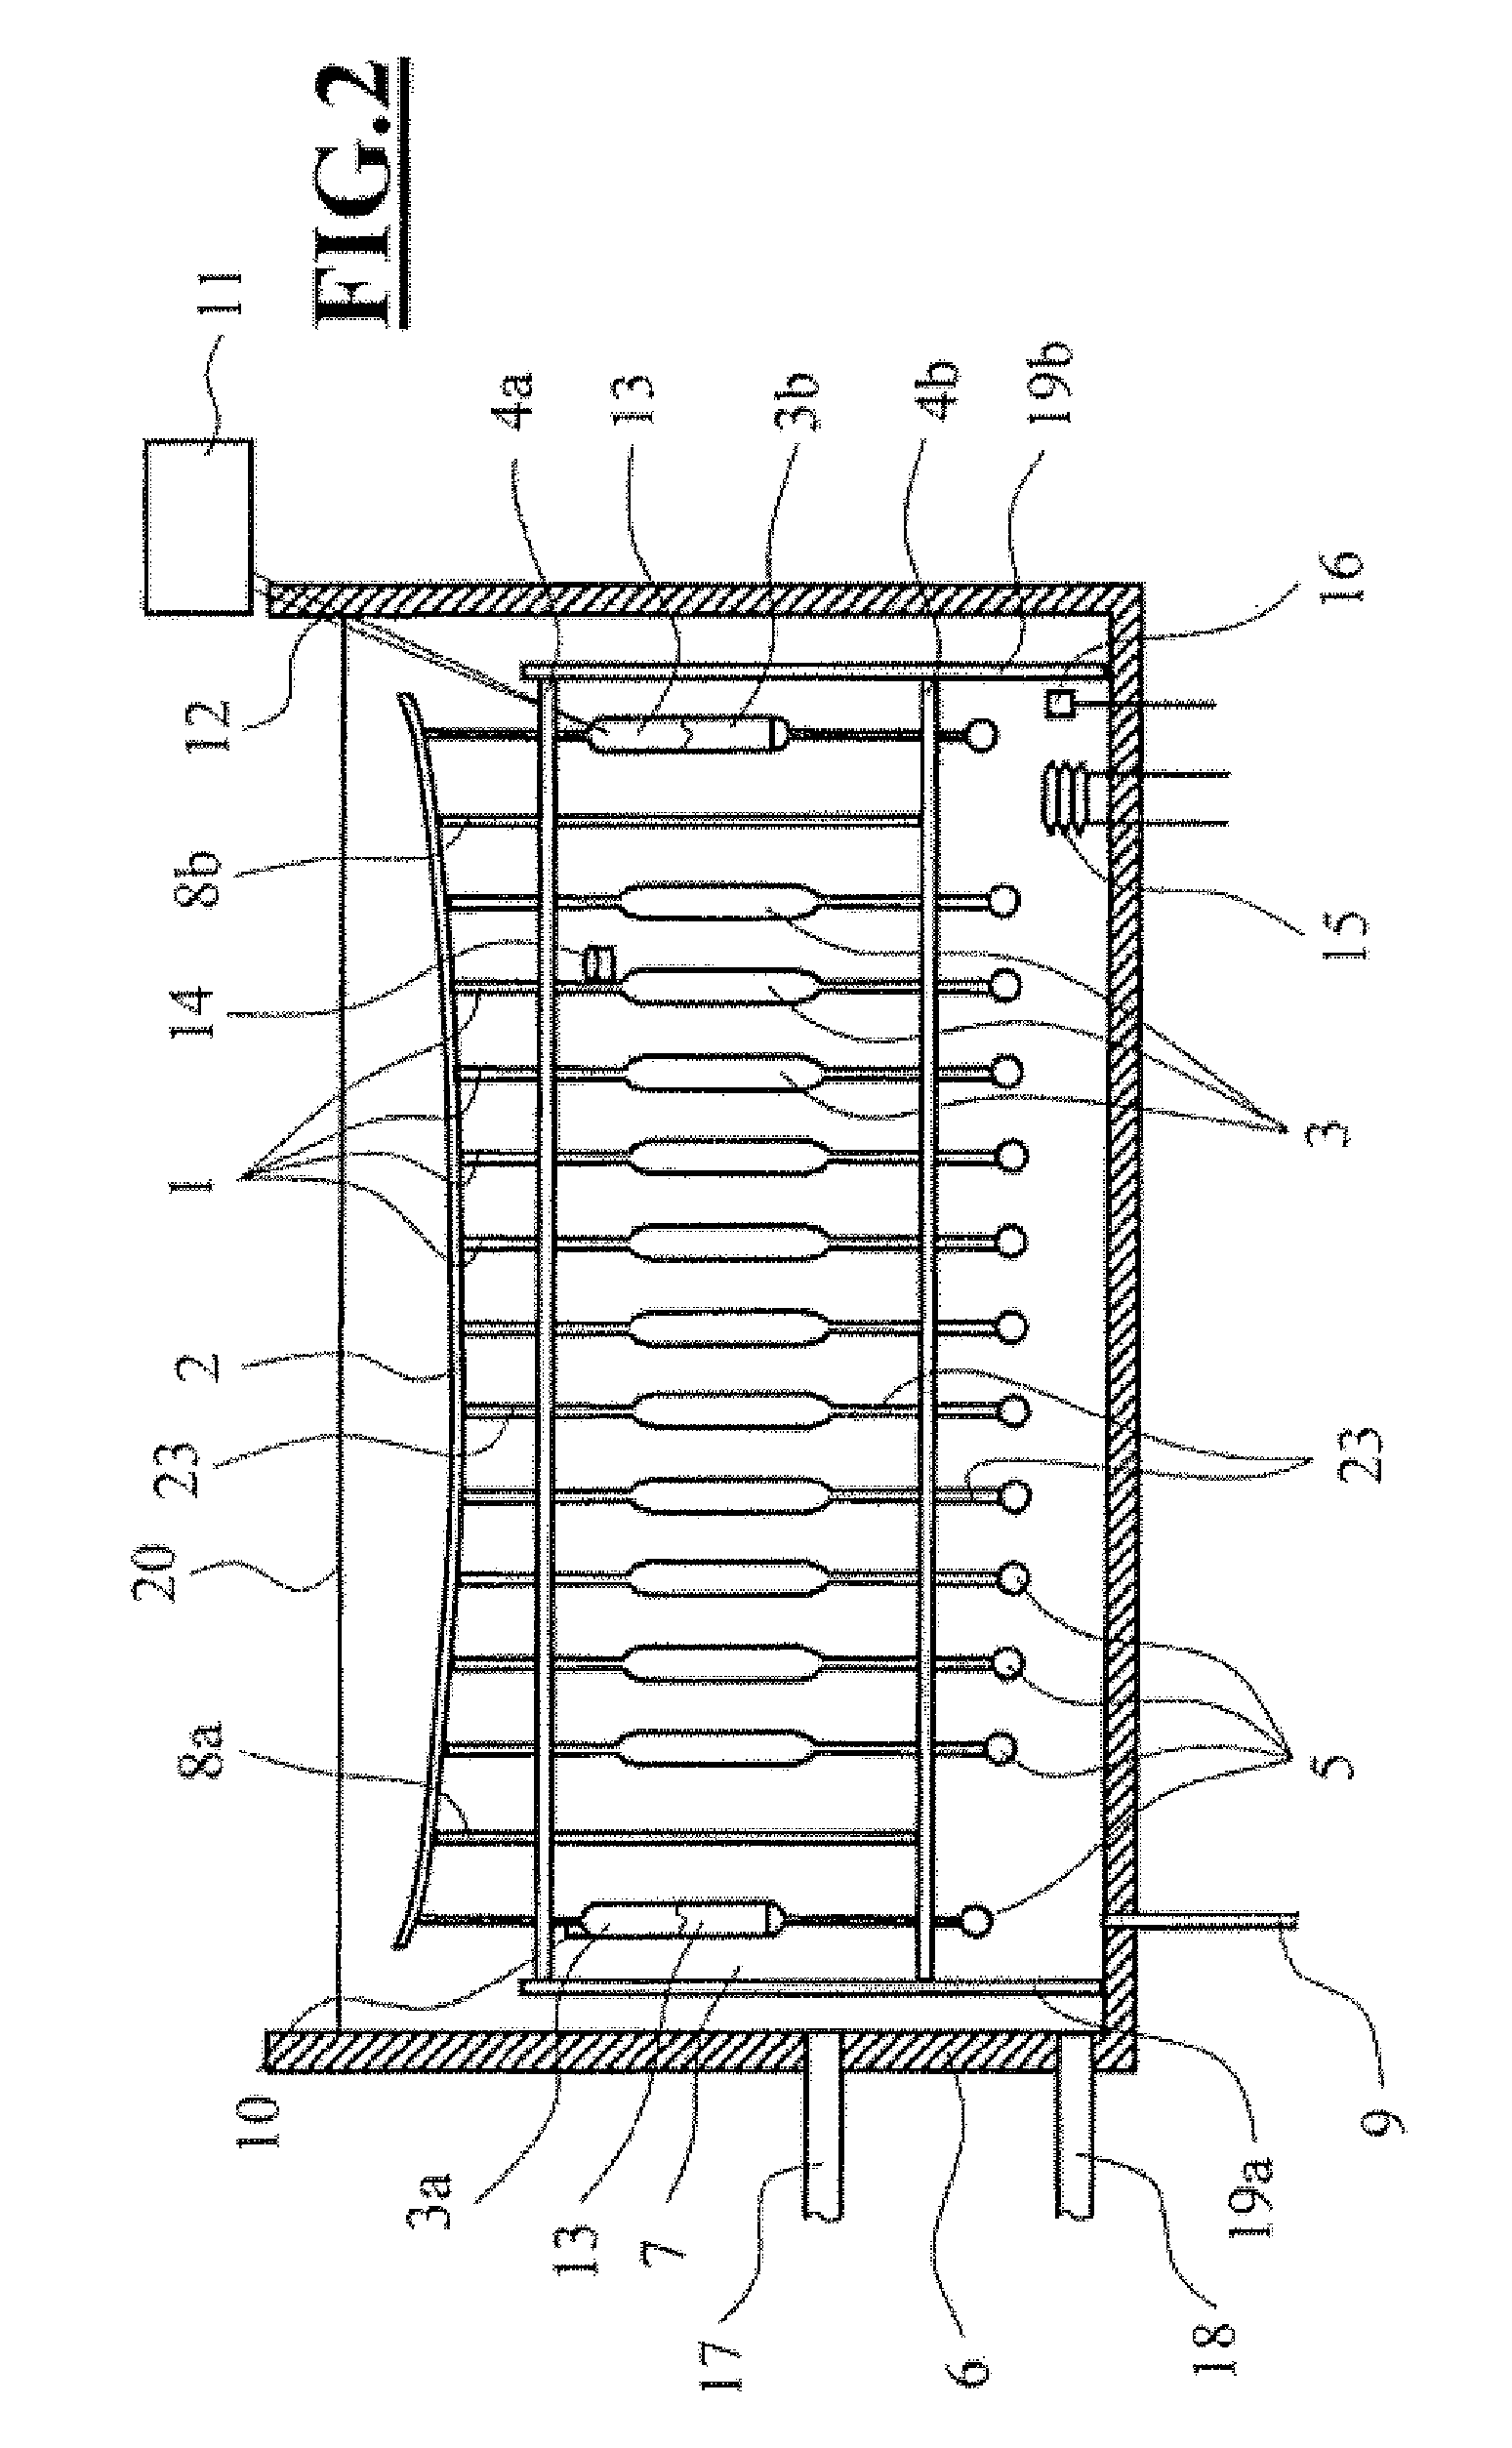 Apparatus for gravitation-compensated mounting of a measurement object